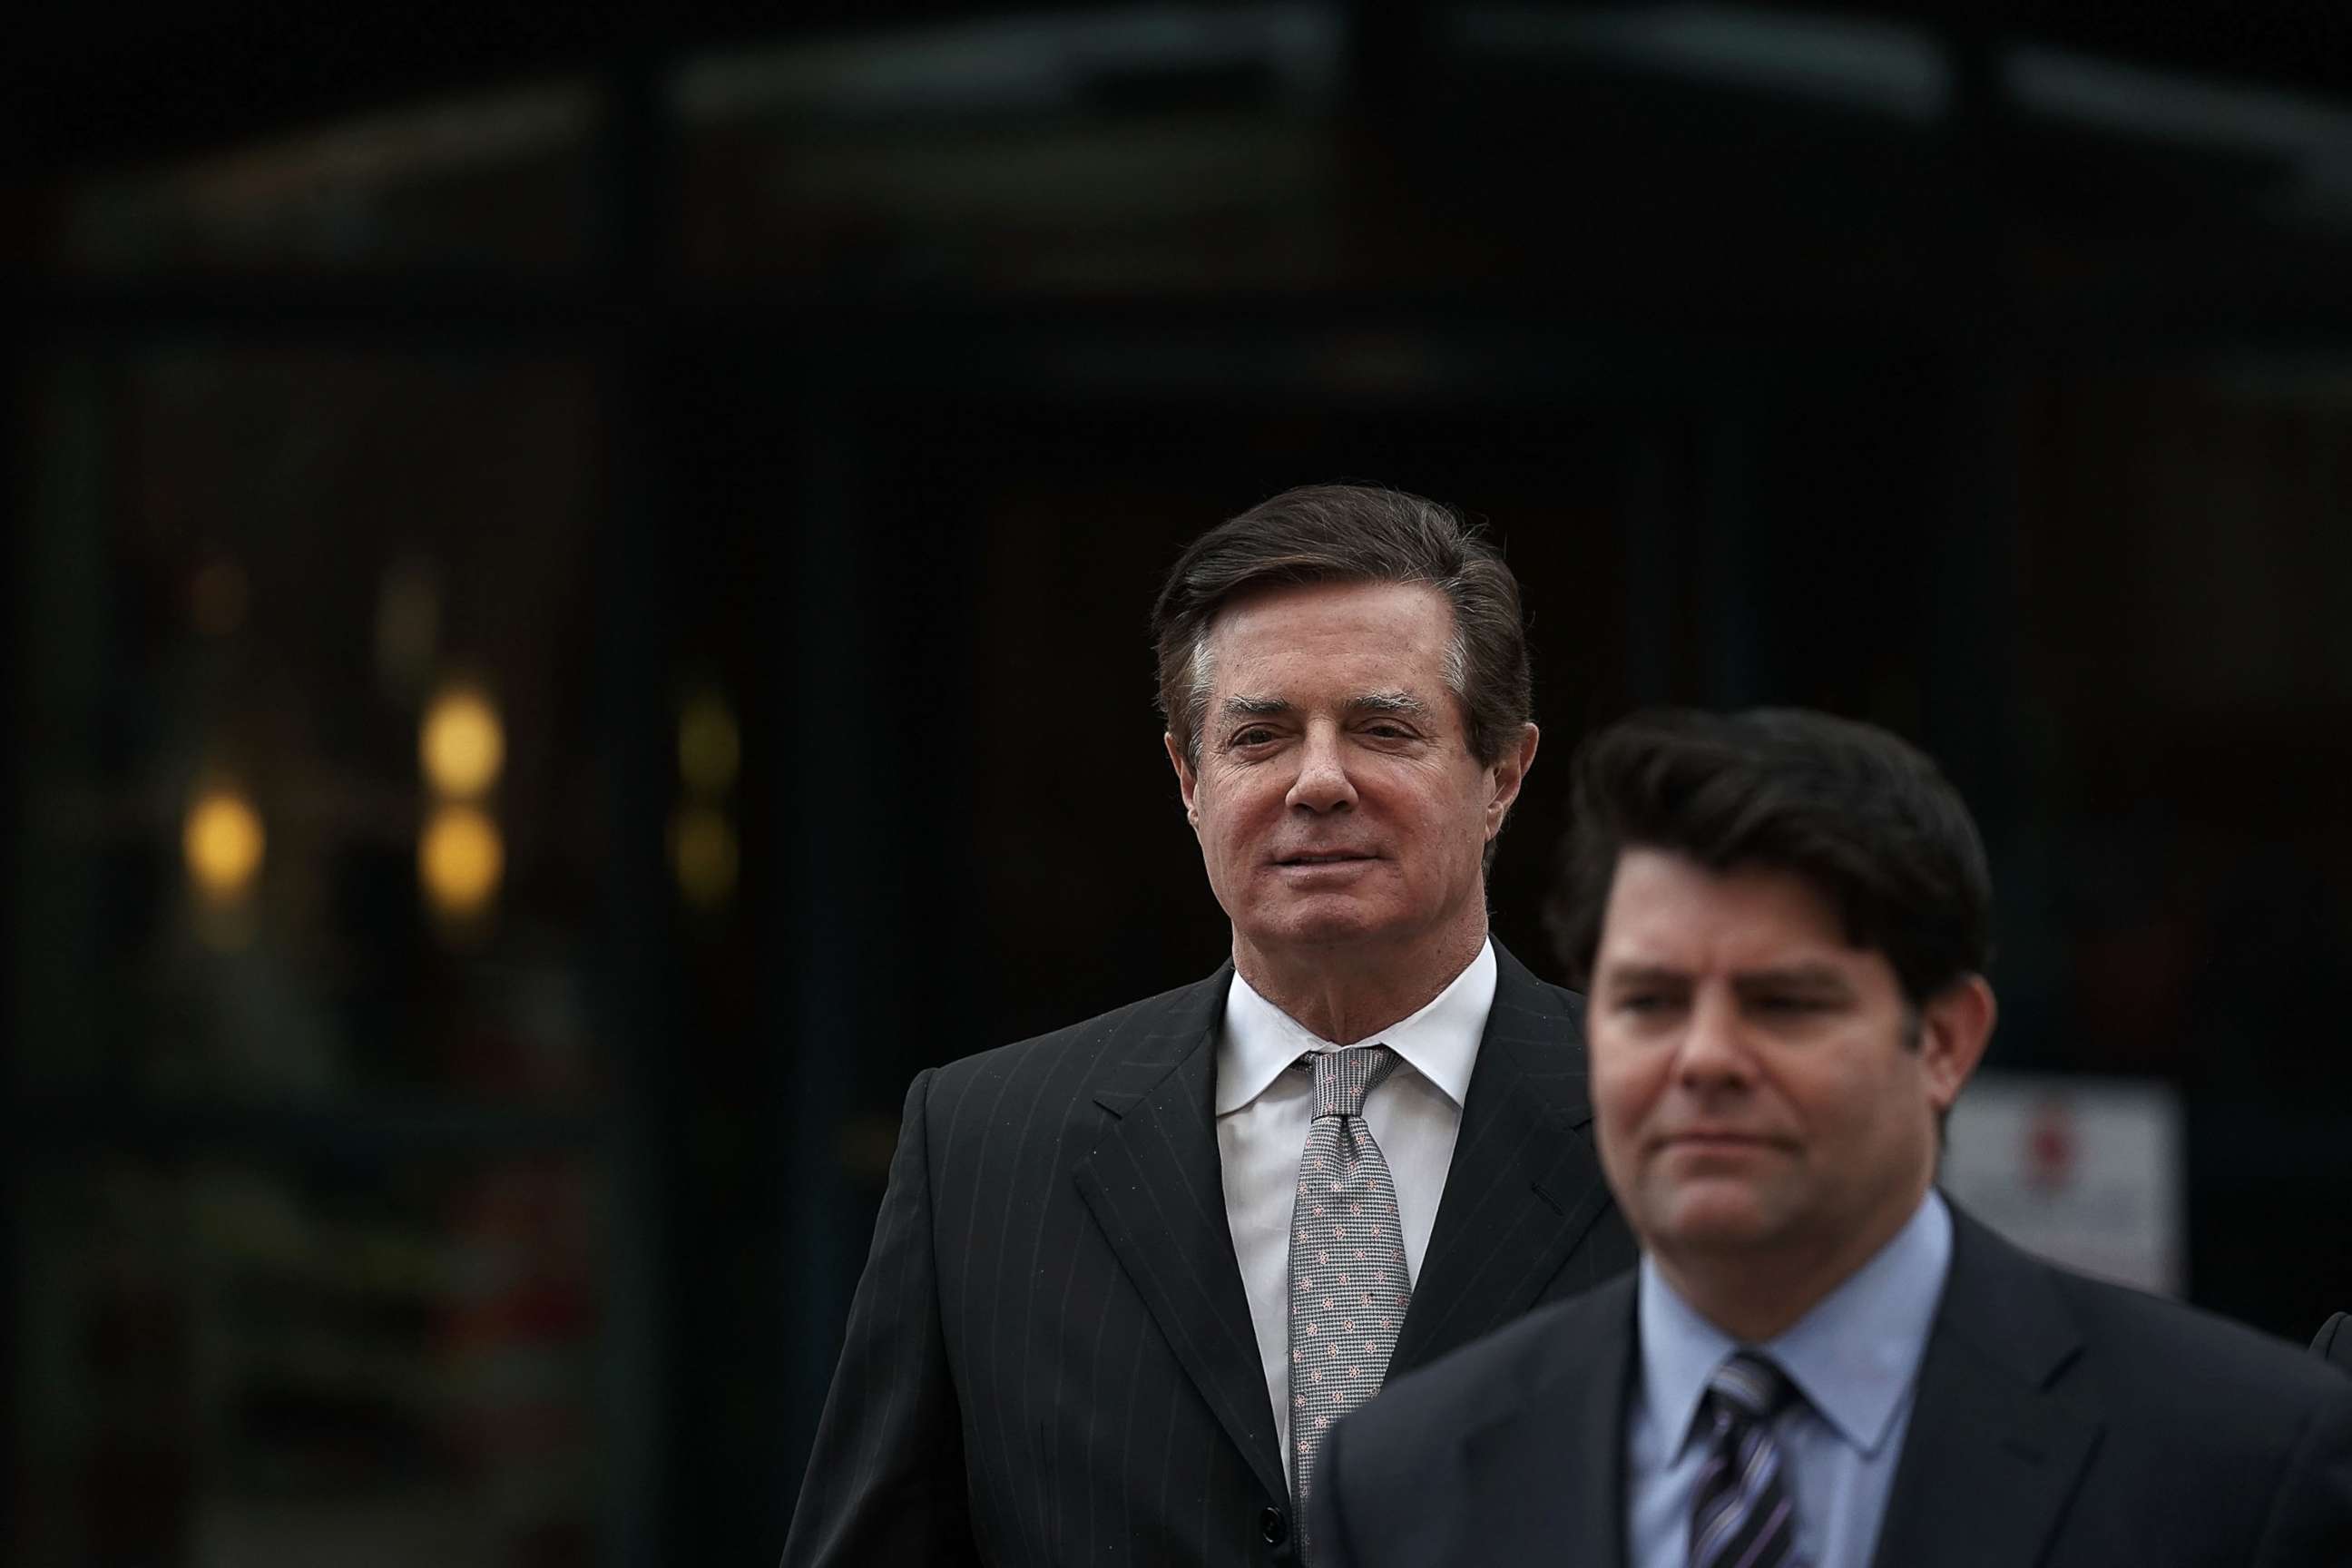 PHOTO: Former Trump campaign manager Paul Manafort (L) leaves the Albert V. Bryan U.S. Courthouse with his spokesman Jason Maloni (R) after an arraignment hearing, March 8, 2018, in Alexandria, Va.